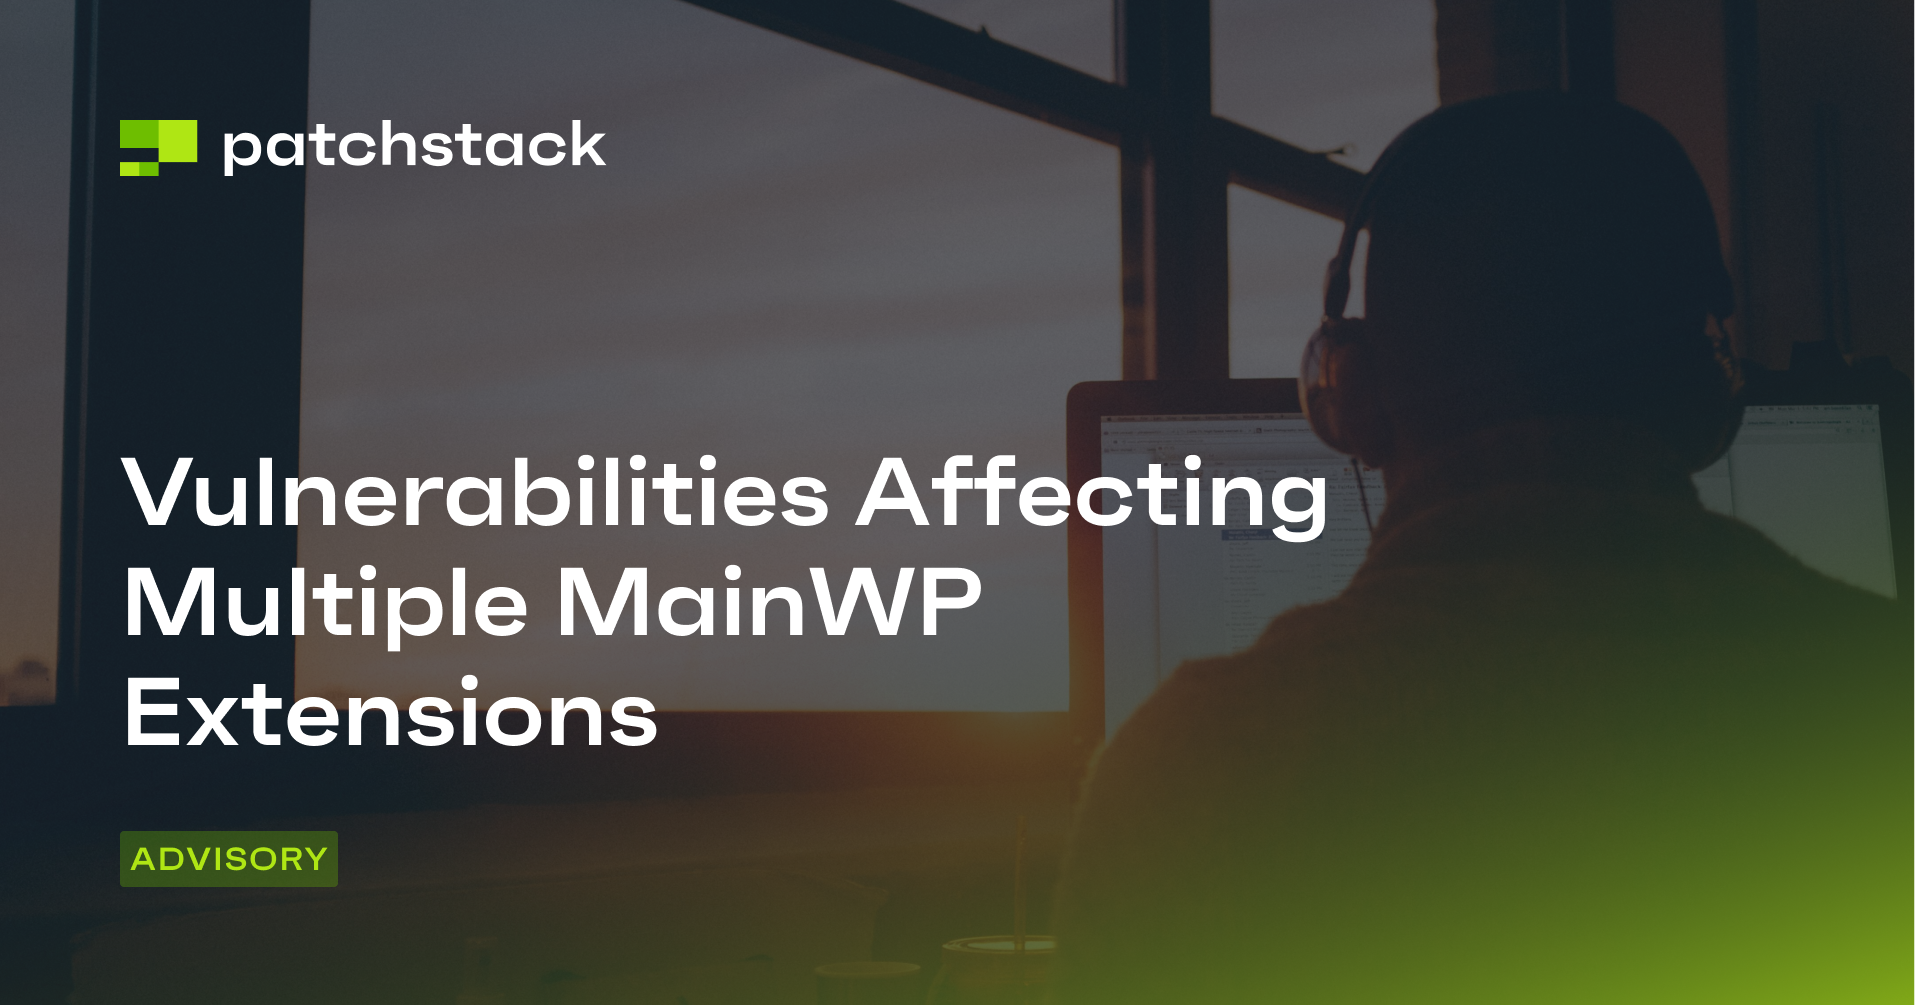 Multiple vulnerabilities affecting multiple MainWP extensions